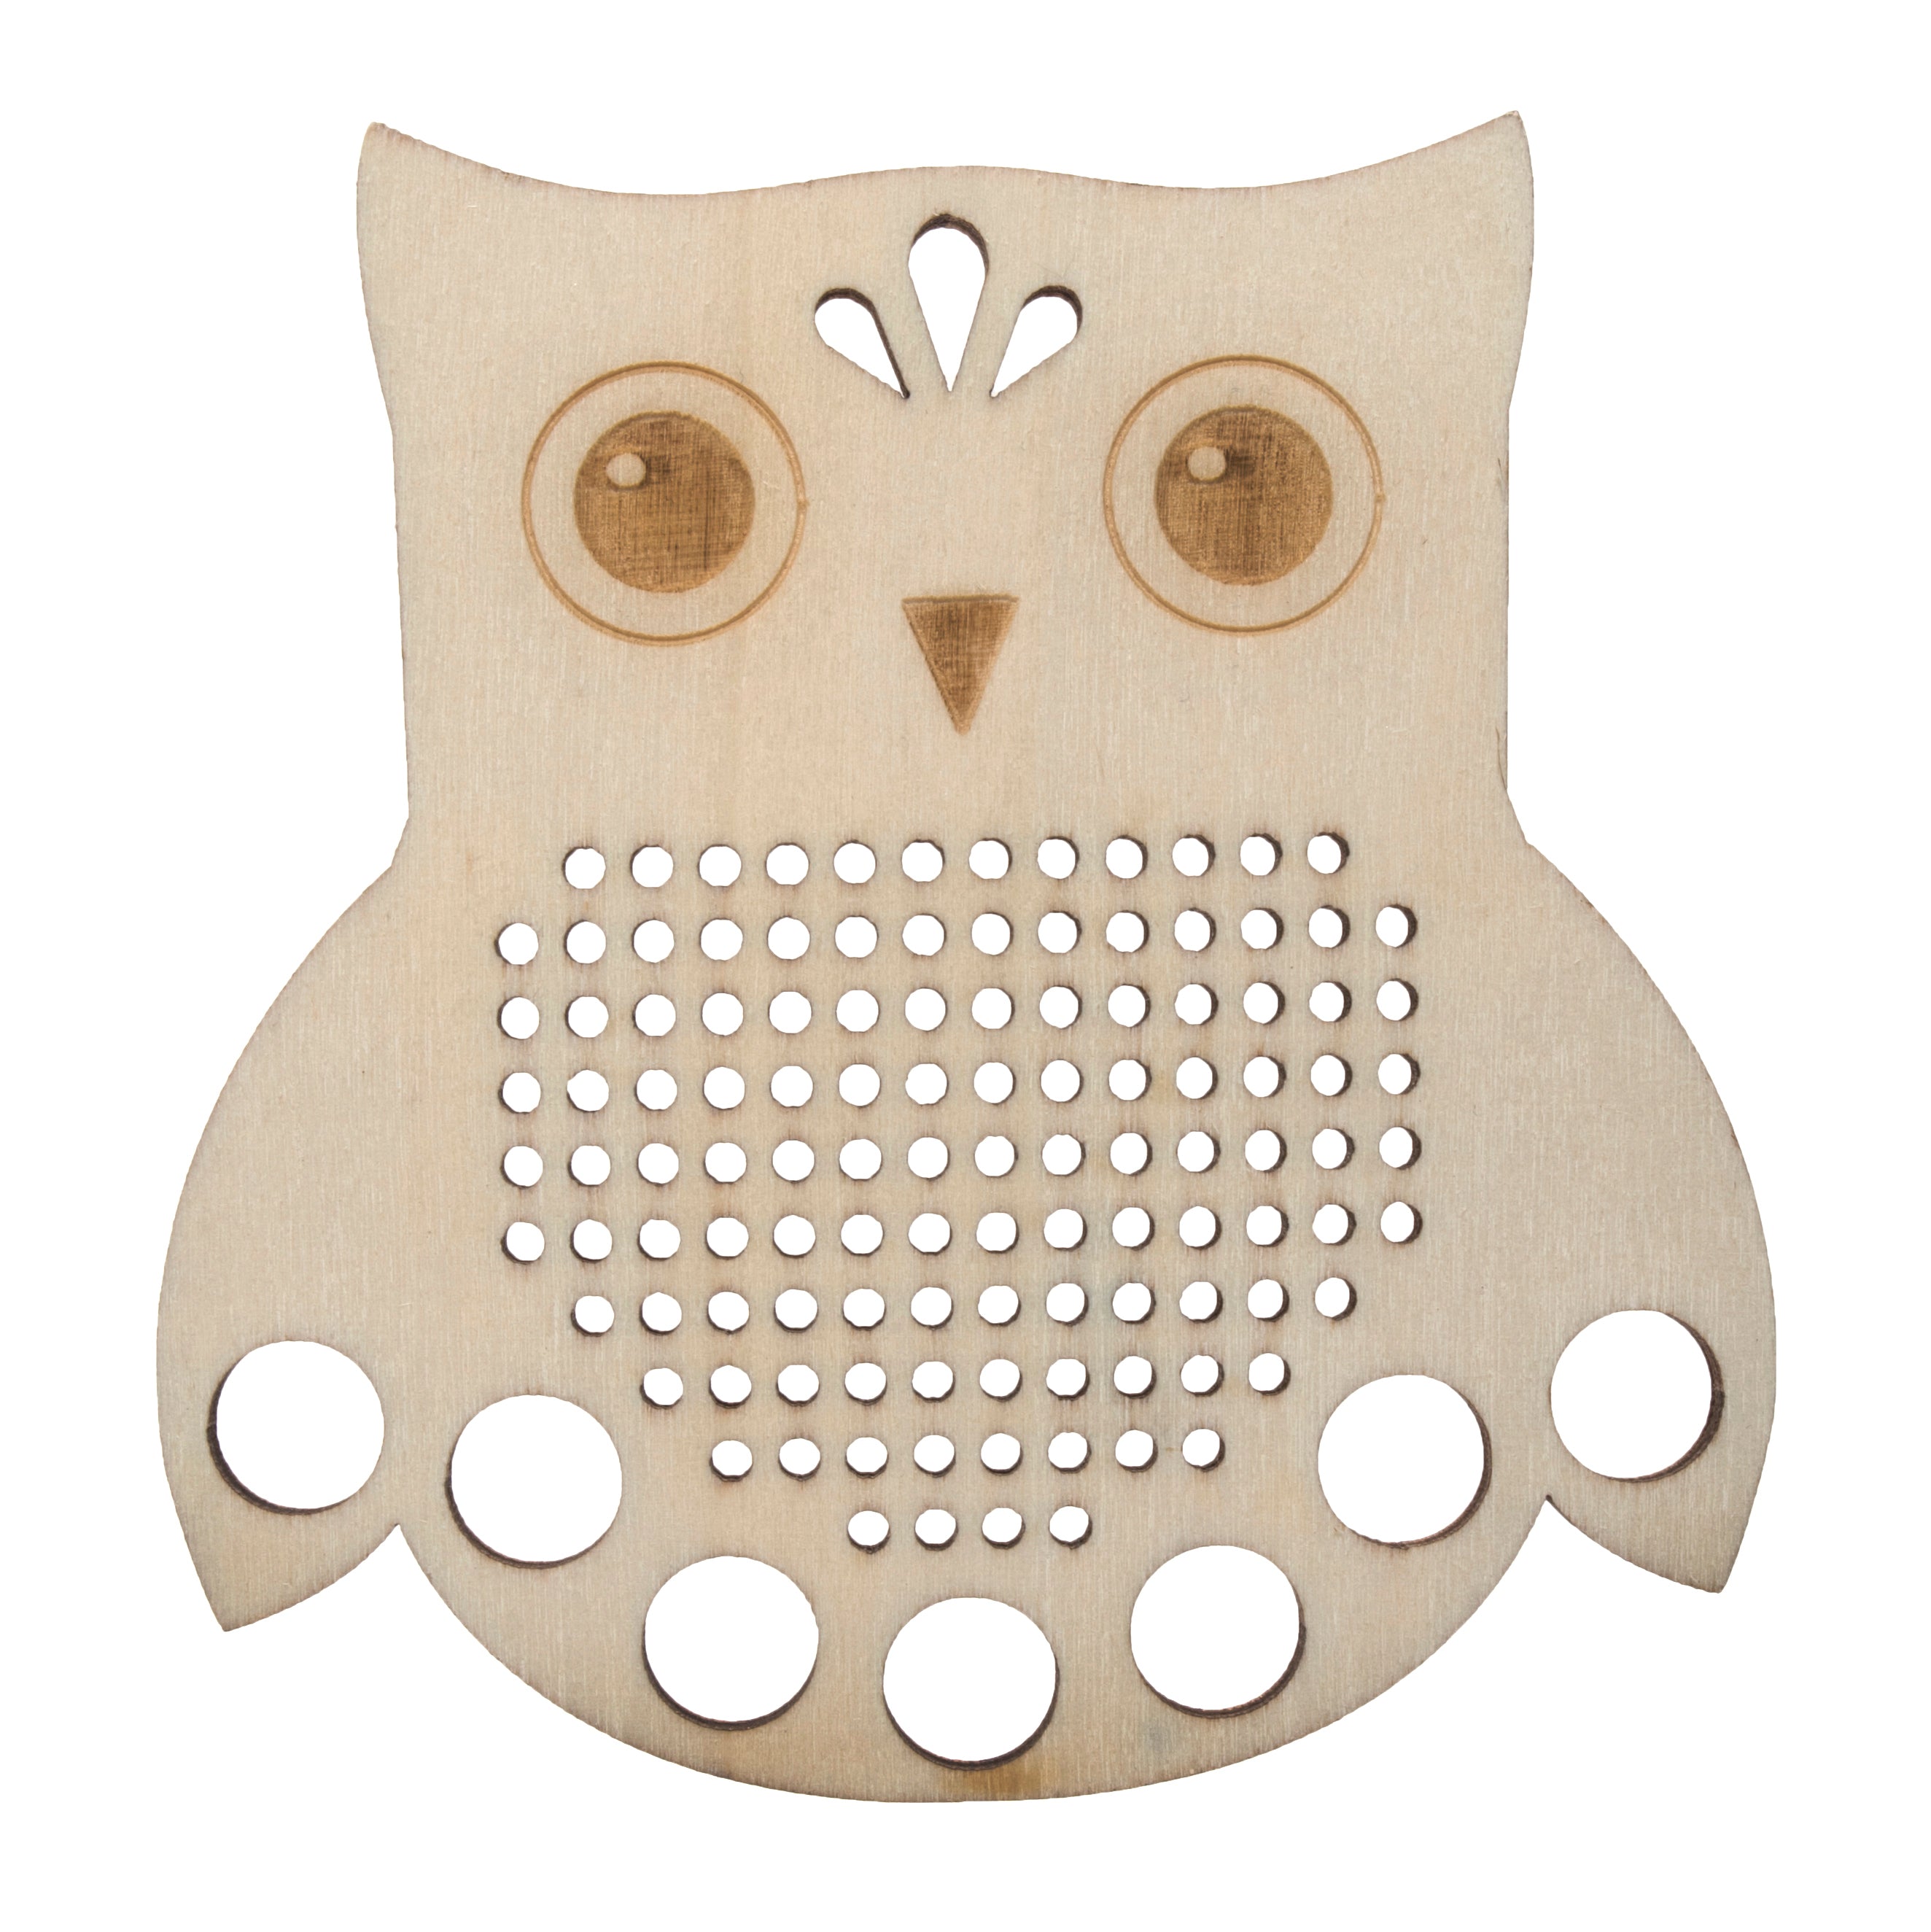 Embroidery Floss Holder, Owl